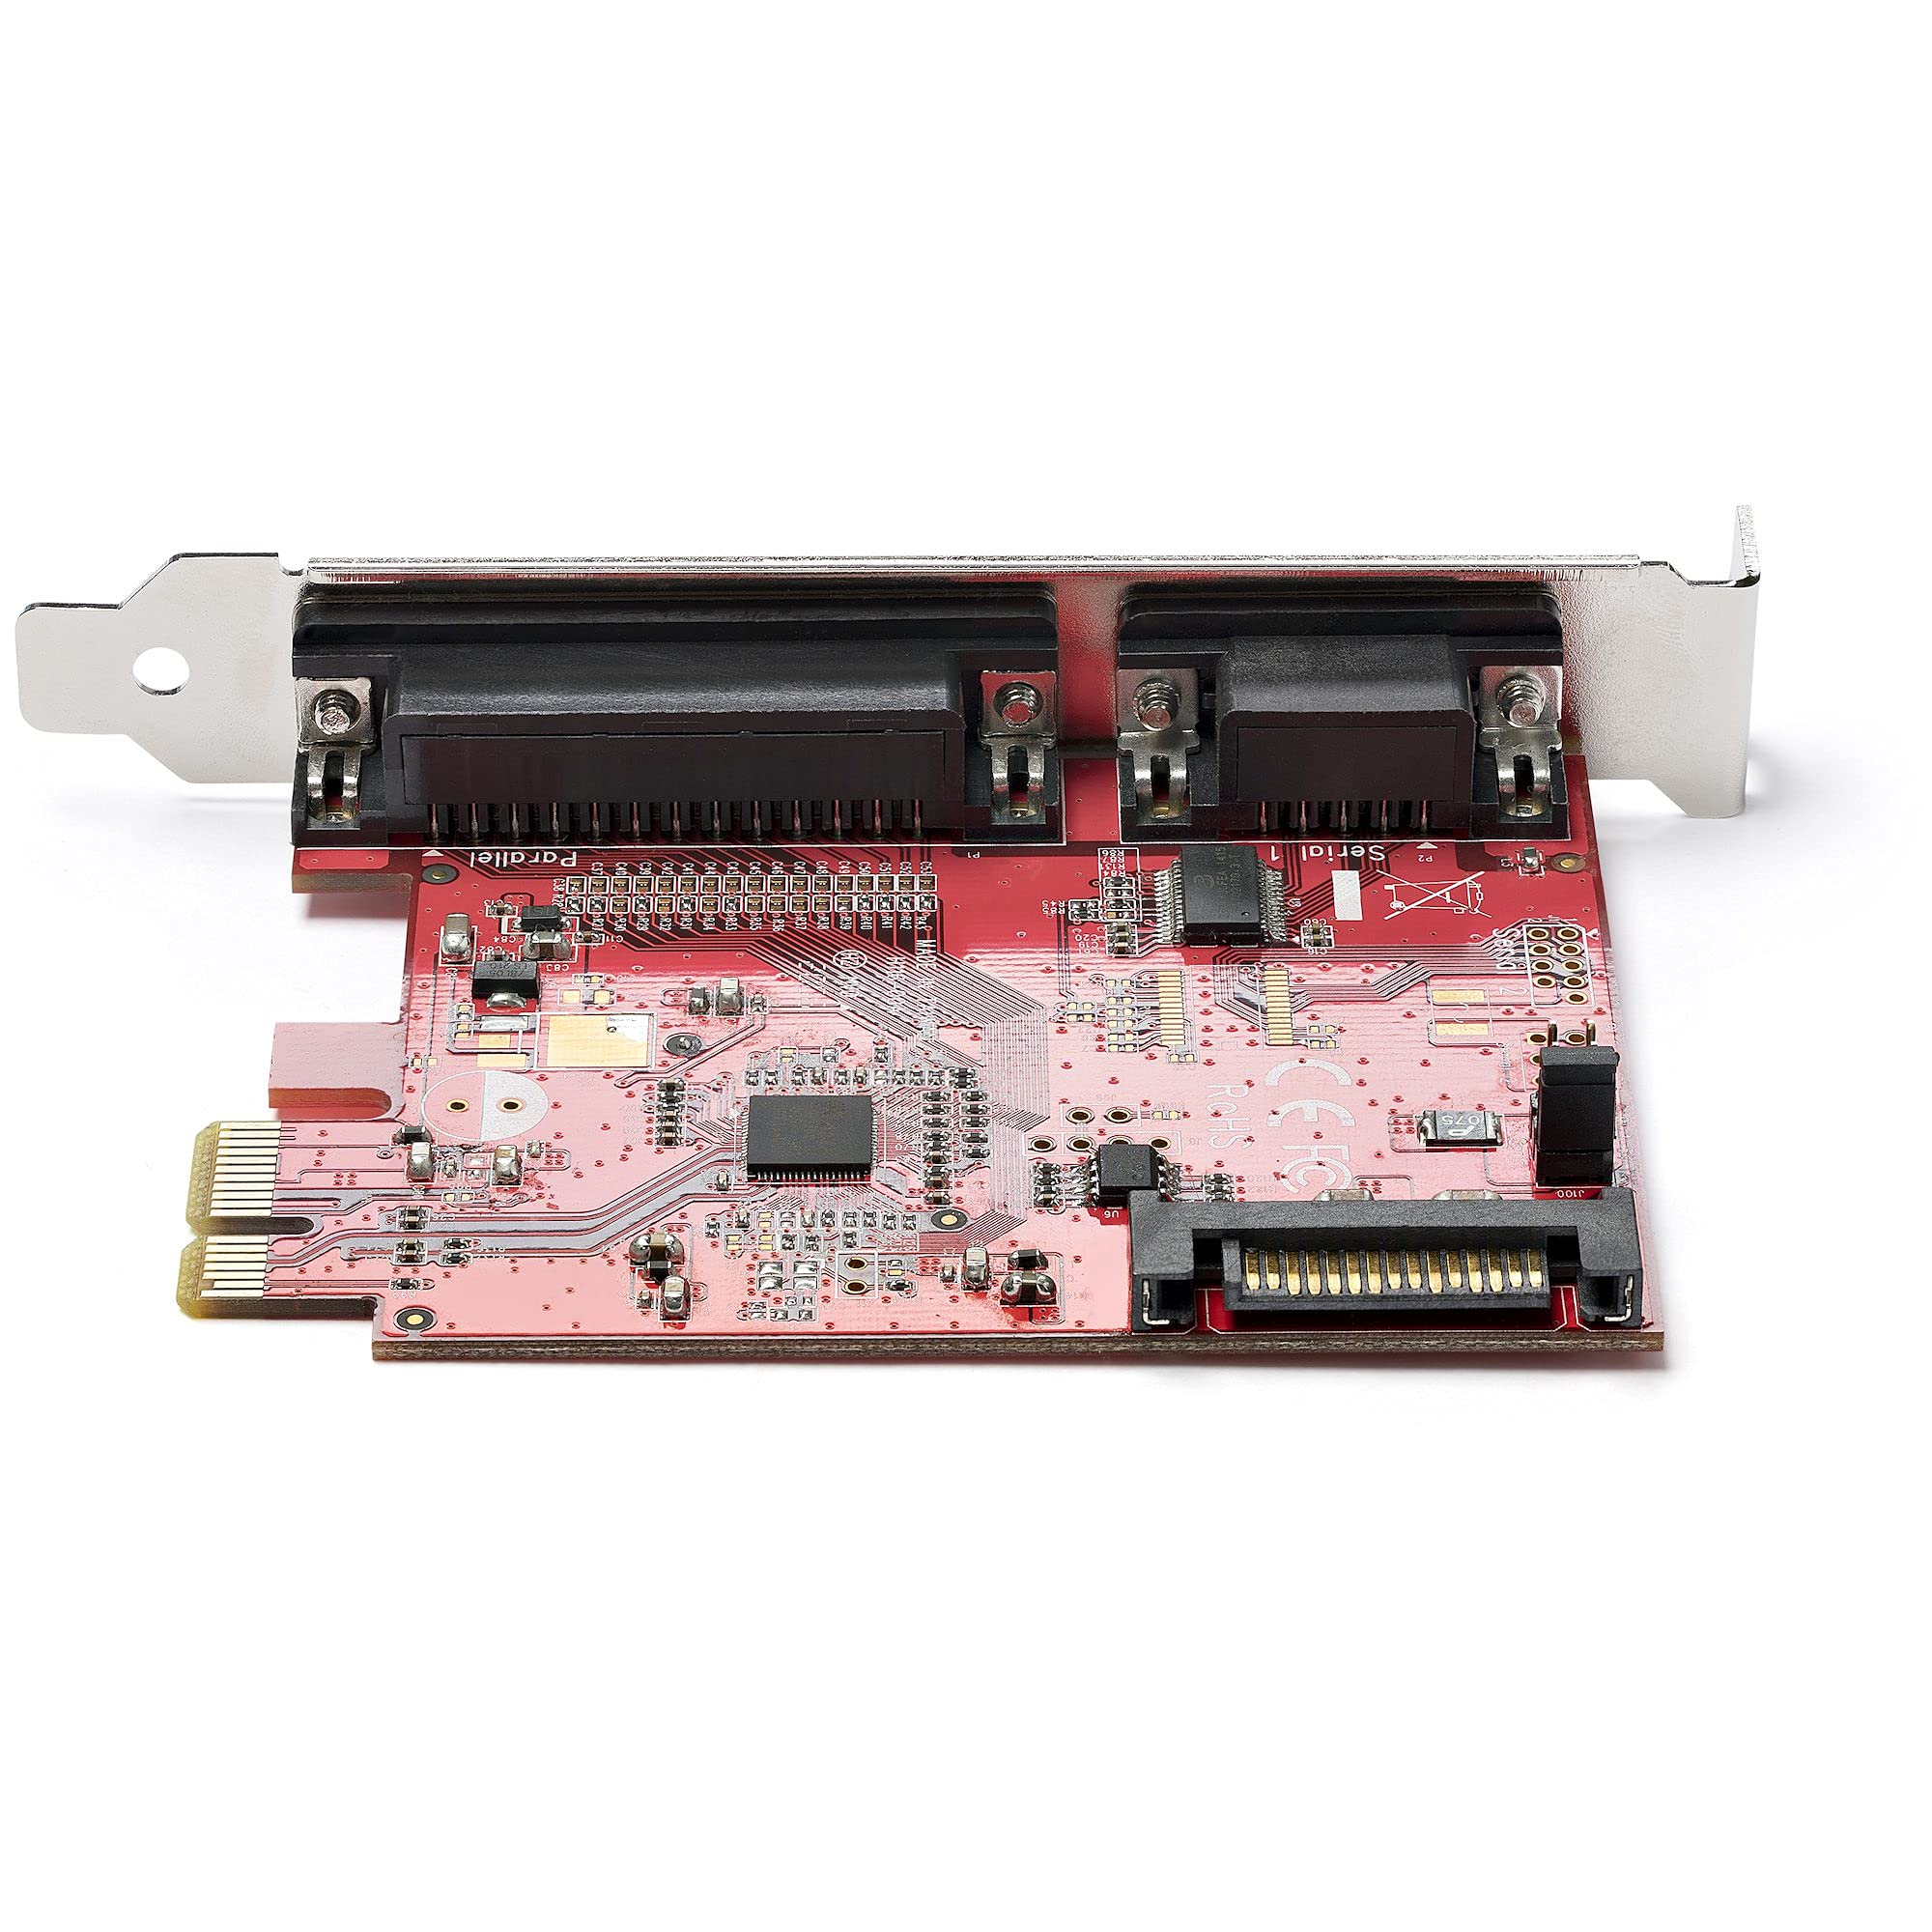 StarTech.com PCIe Card with Serial and Parallel Port - PCI Express Combo Adapter Card with 1x DB25 Parallel Port & 1x RS232 Serial Port - Expansion/Controller Card - PCIe Printer Card (PEX1S1P950)